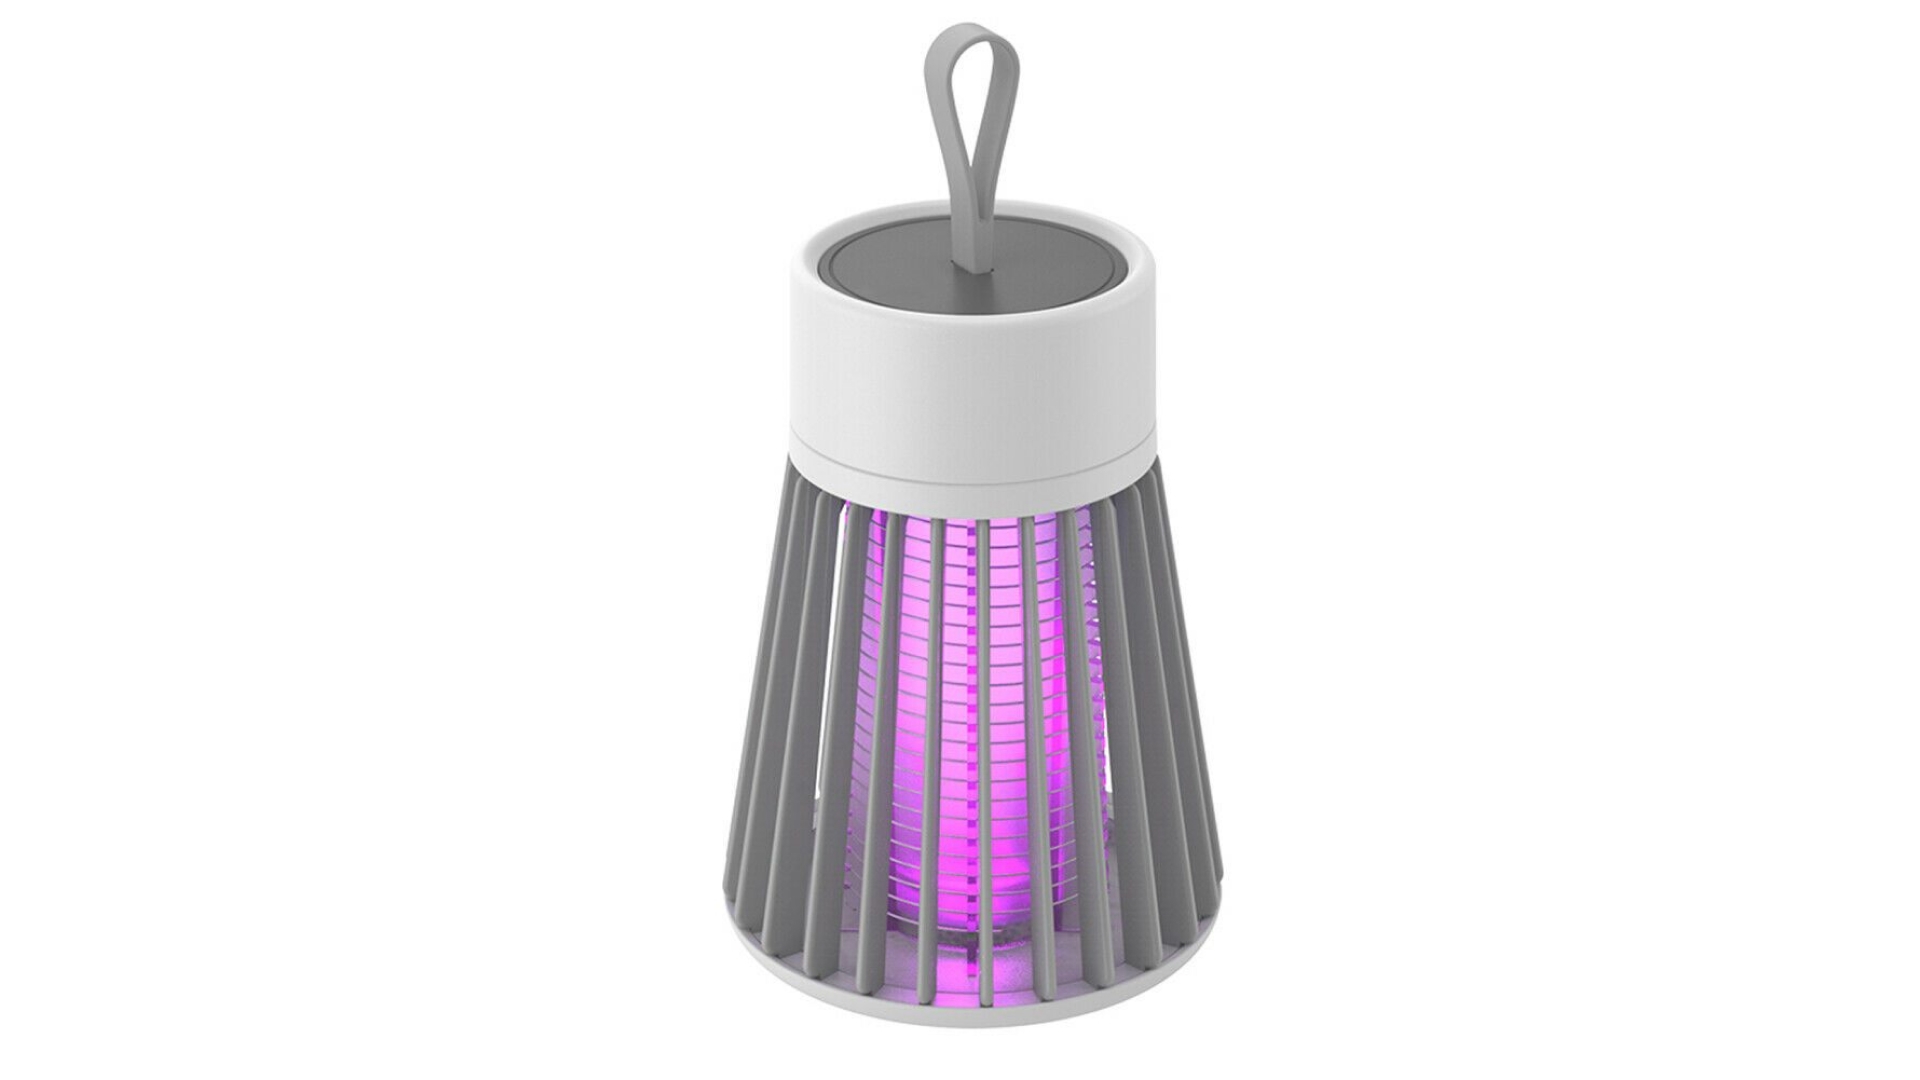 An upright portable mosquito lamp. It's turned on, producing a purple light.